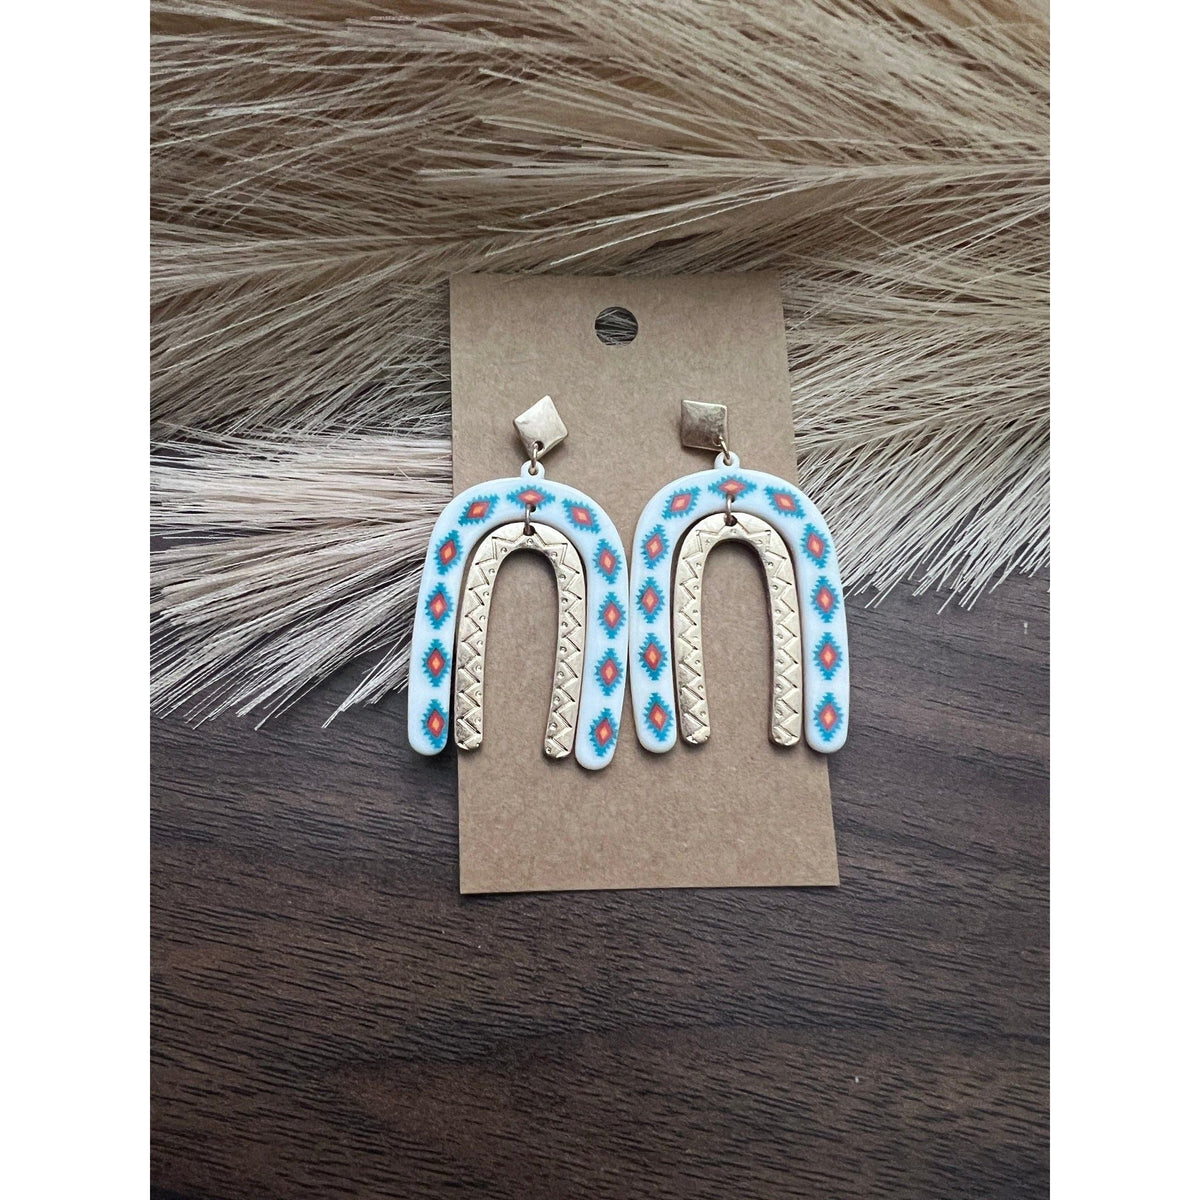 Cassidy Resin Arch Earrings Western Earrings TheFringeCultureCollective